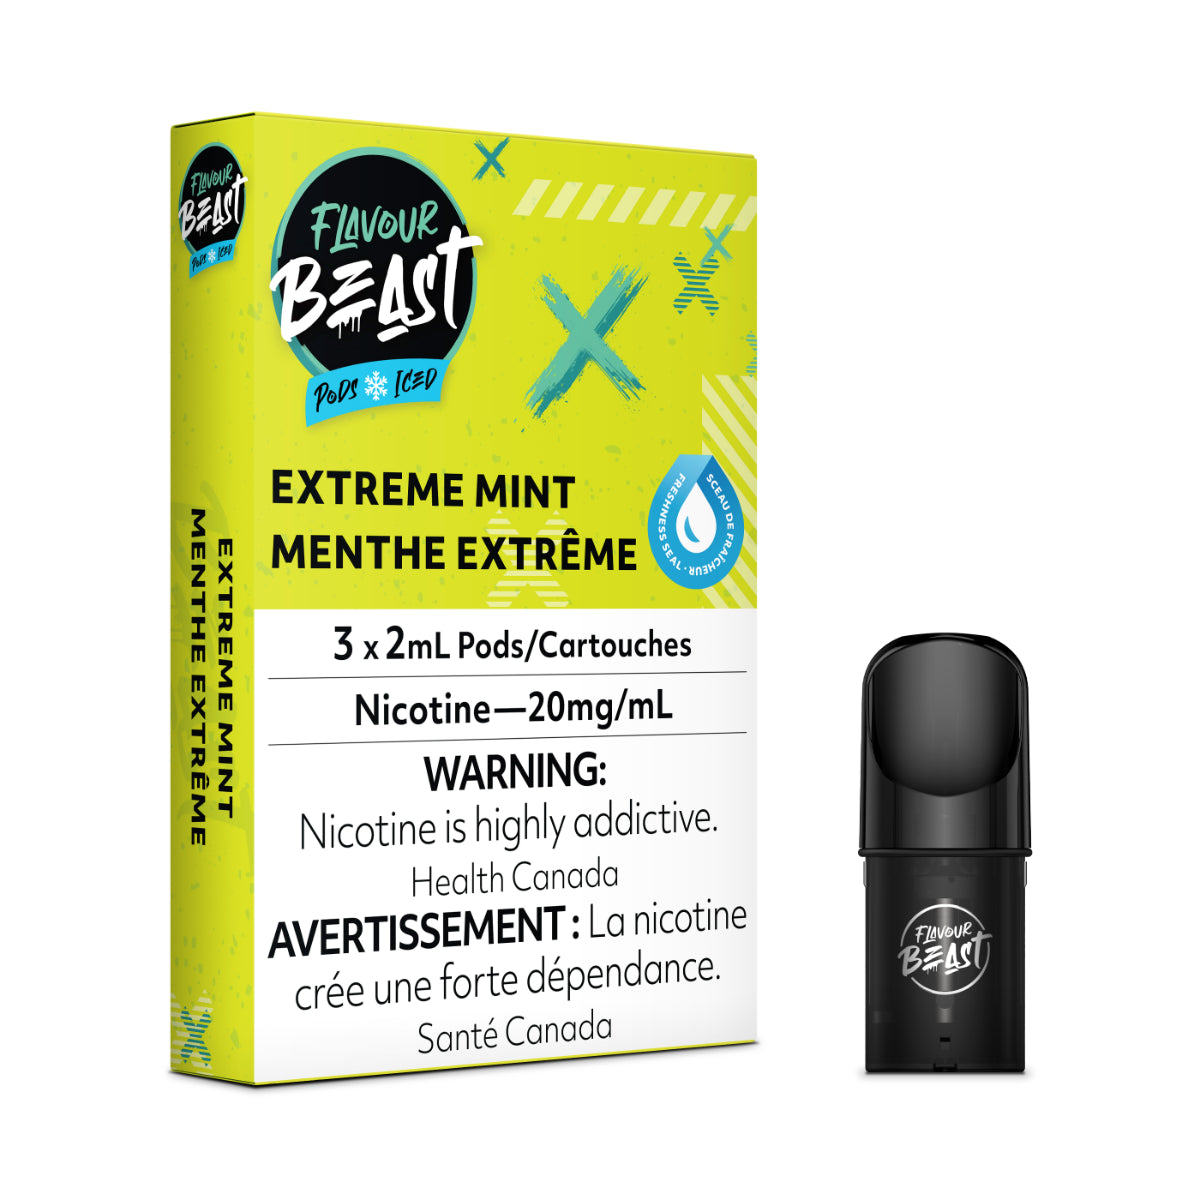 Extreme Mint - Flavour Beast Pod Pack - 20mg - EXCISED